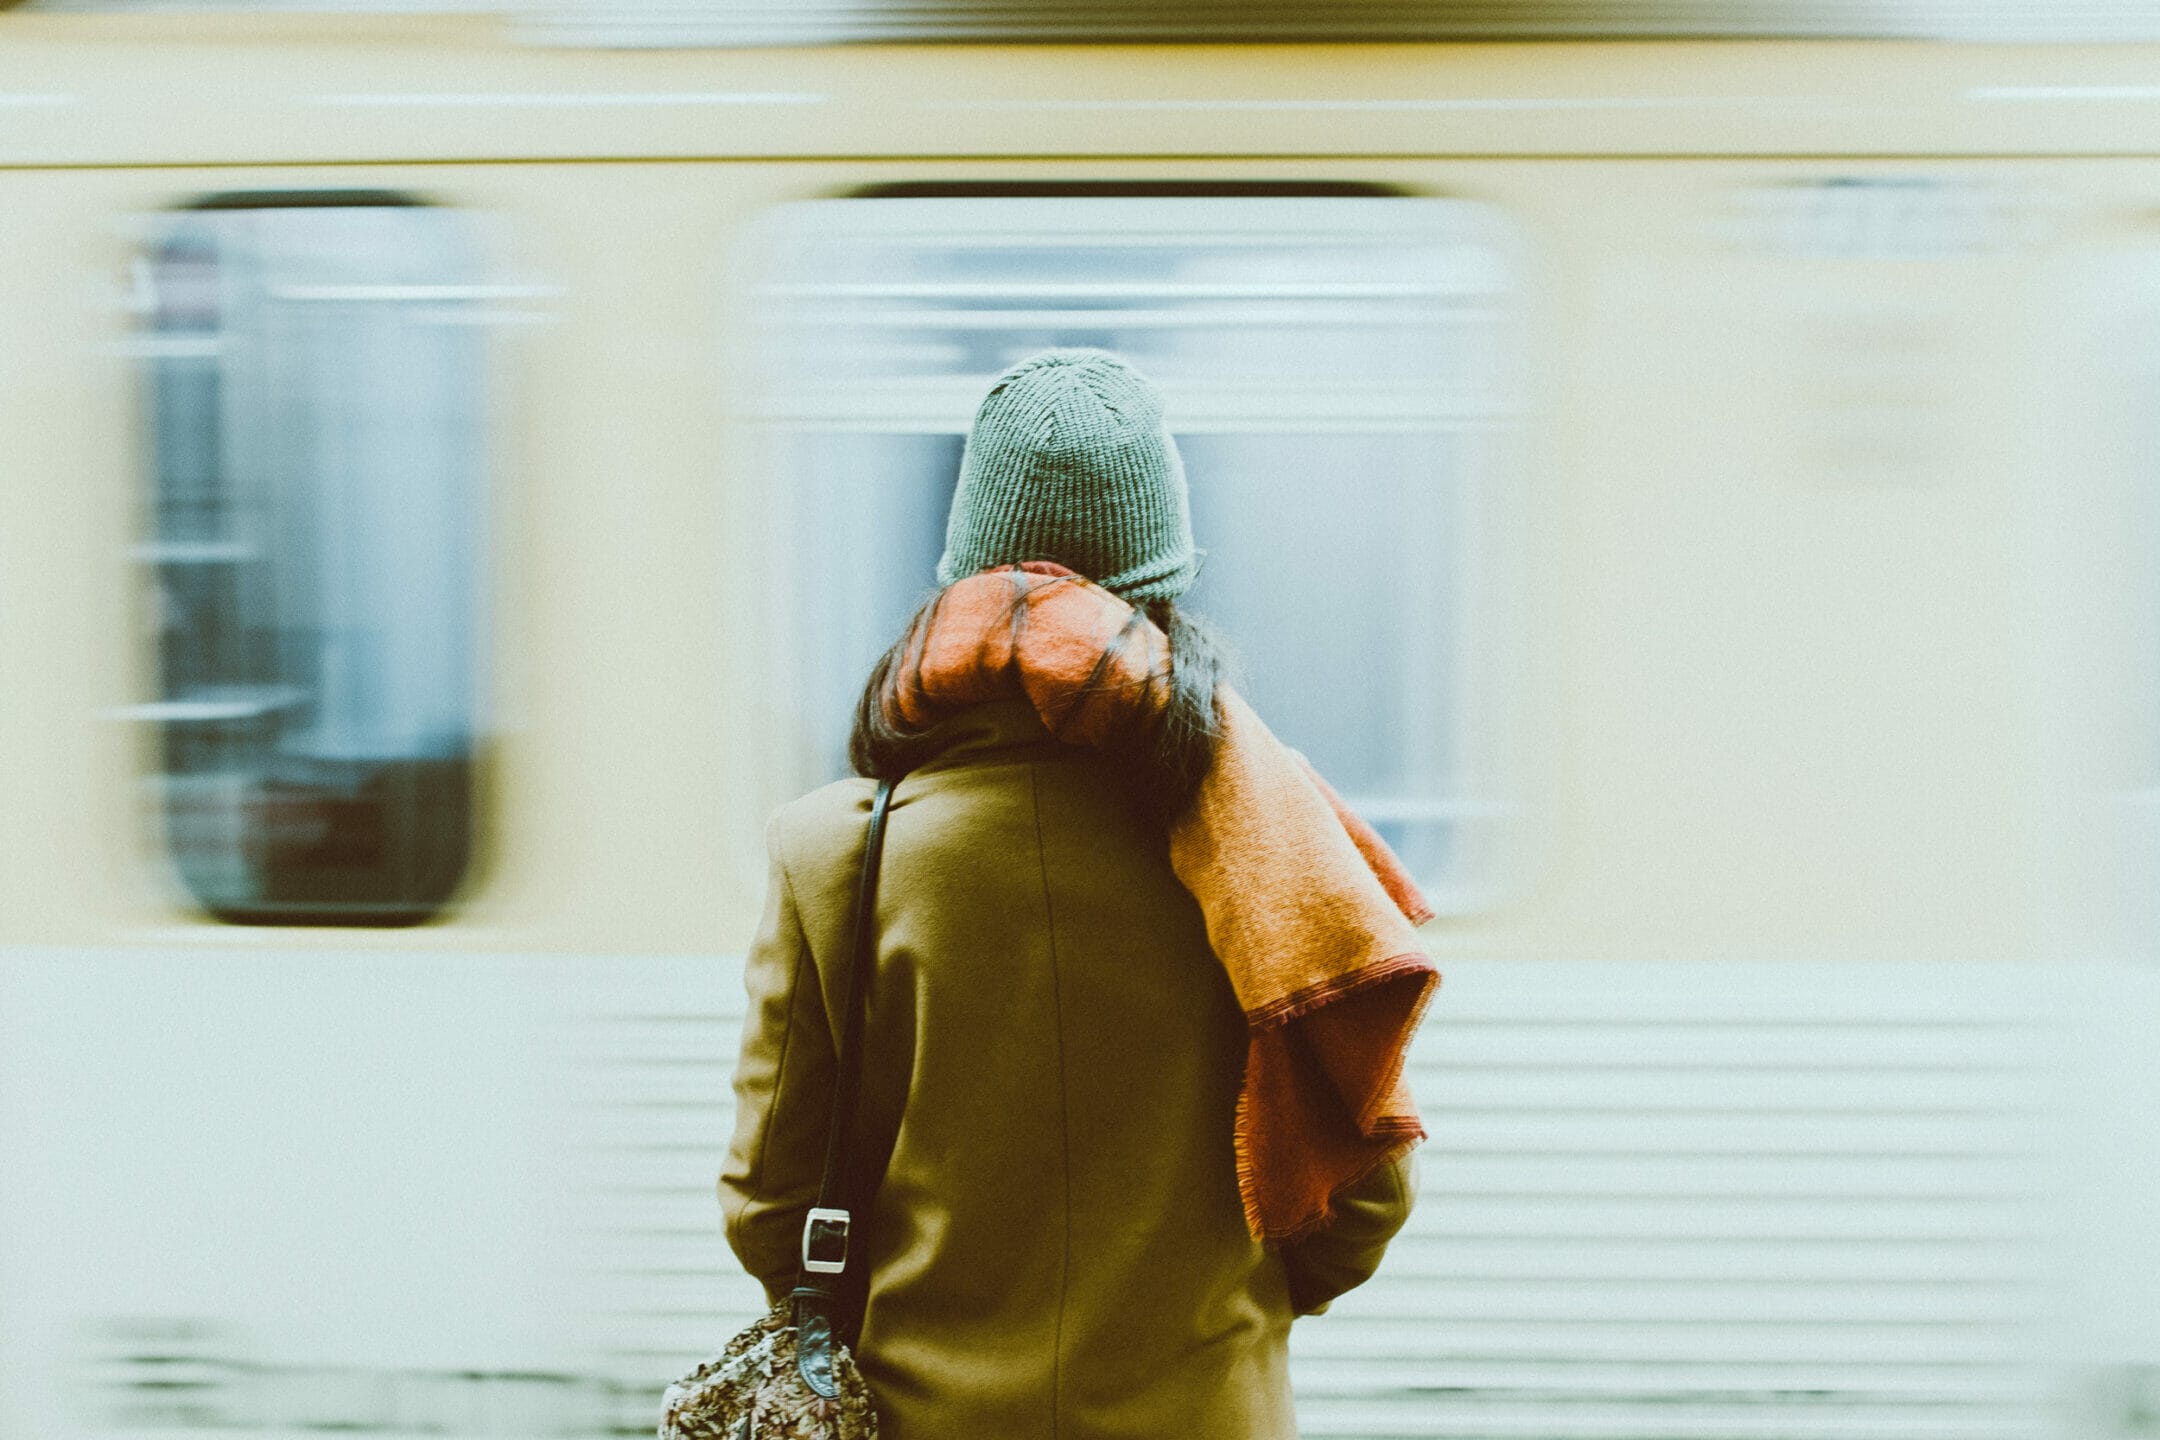 A woman is seen from behind as a subway train arrives in front of her. She is wearing winter clothes and carry a duffel bag.